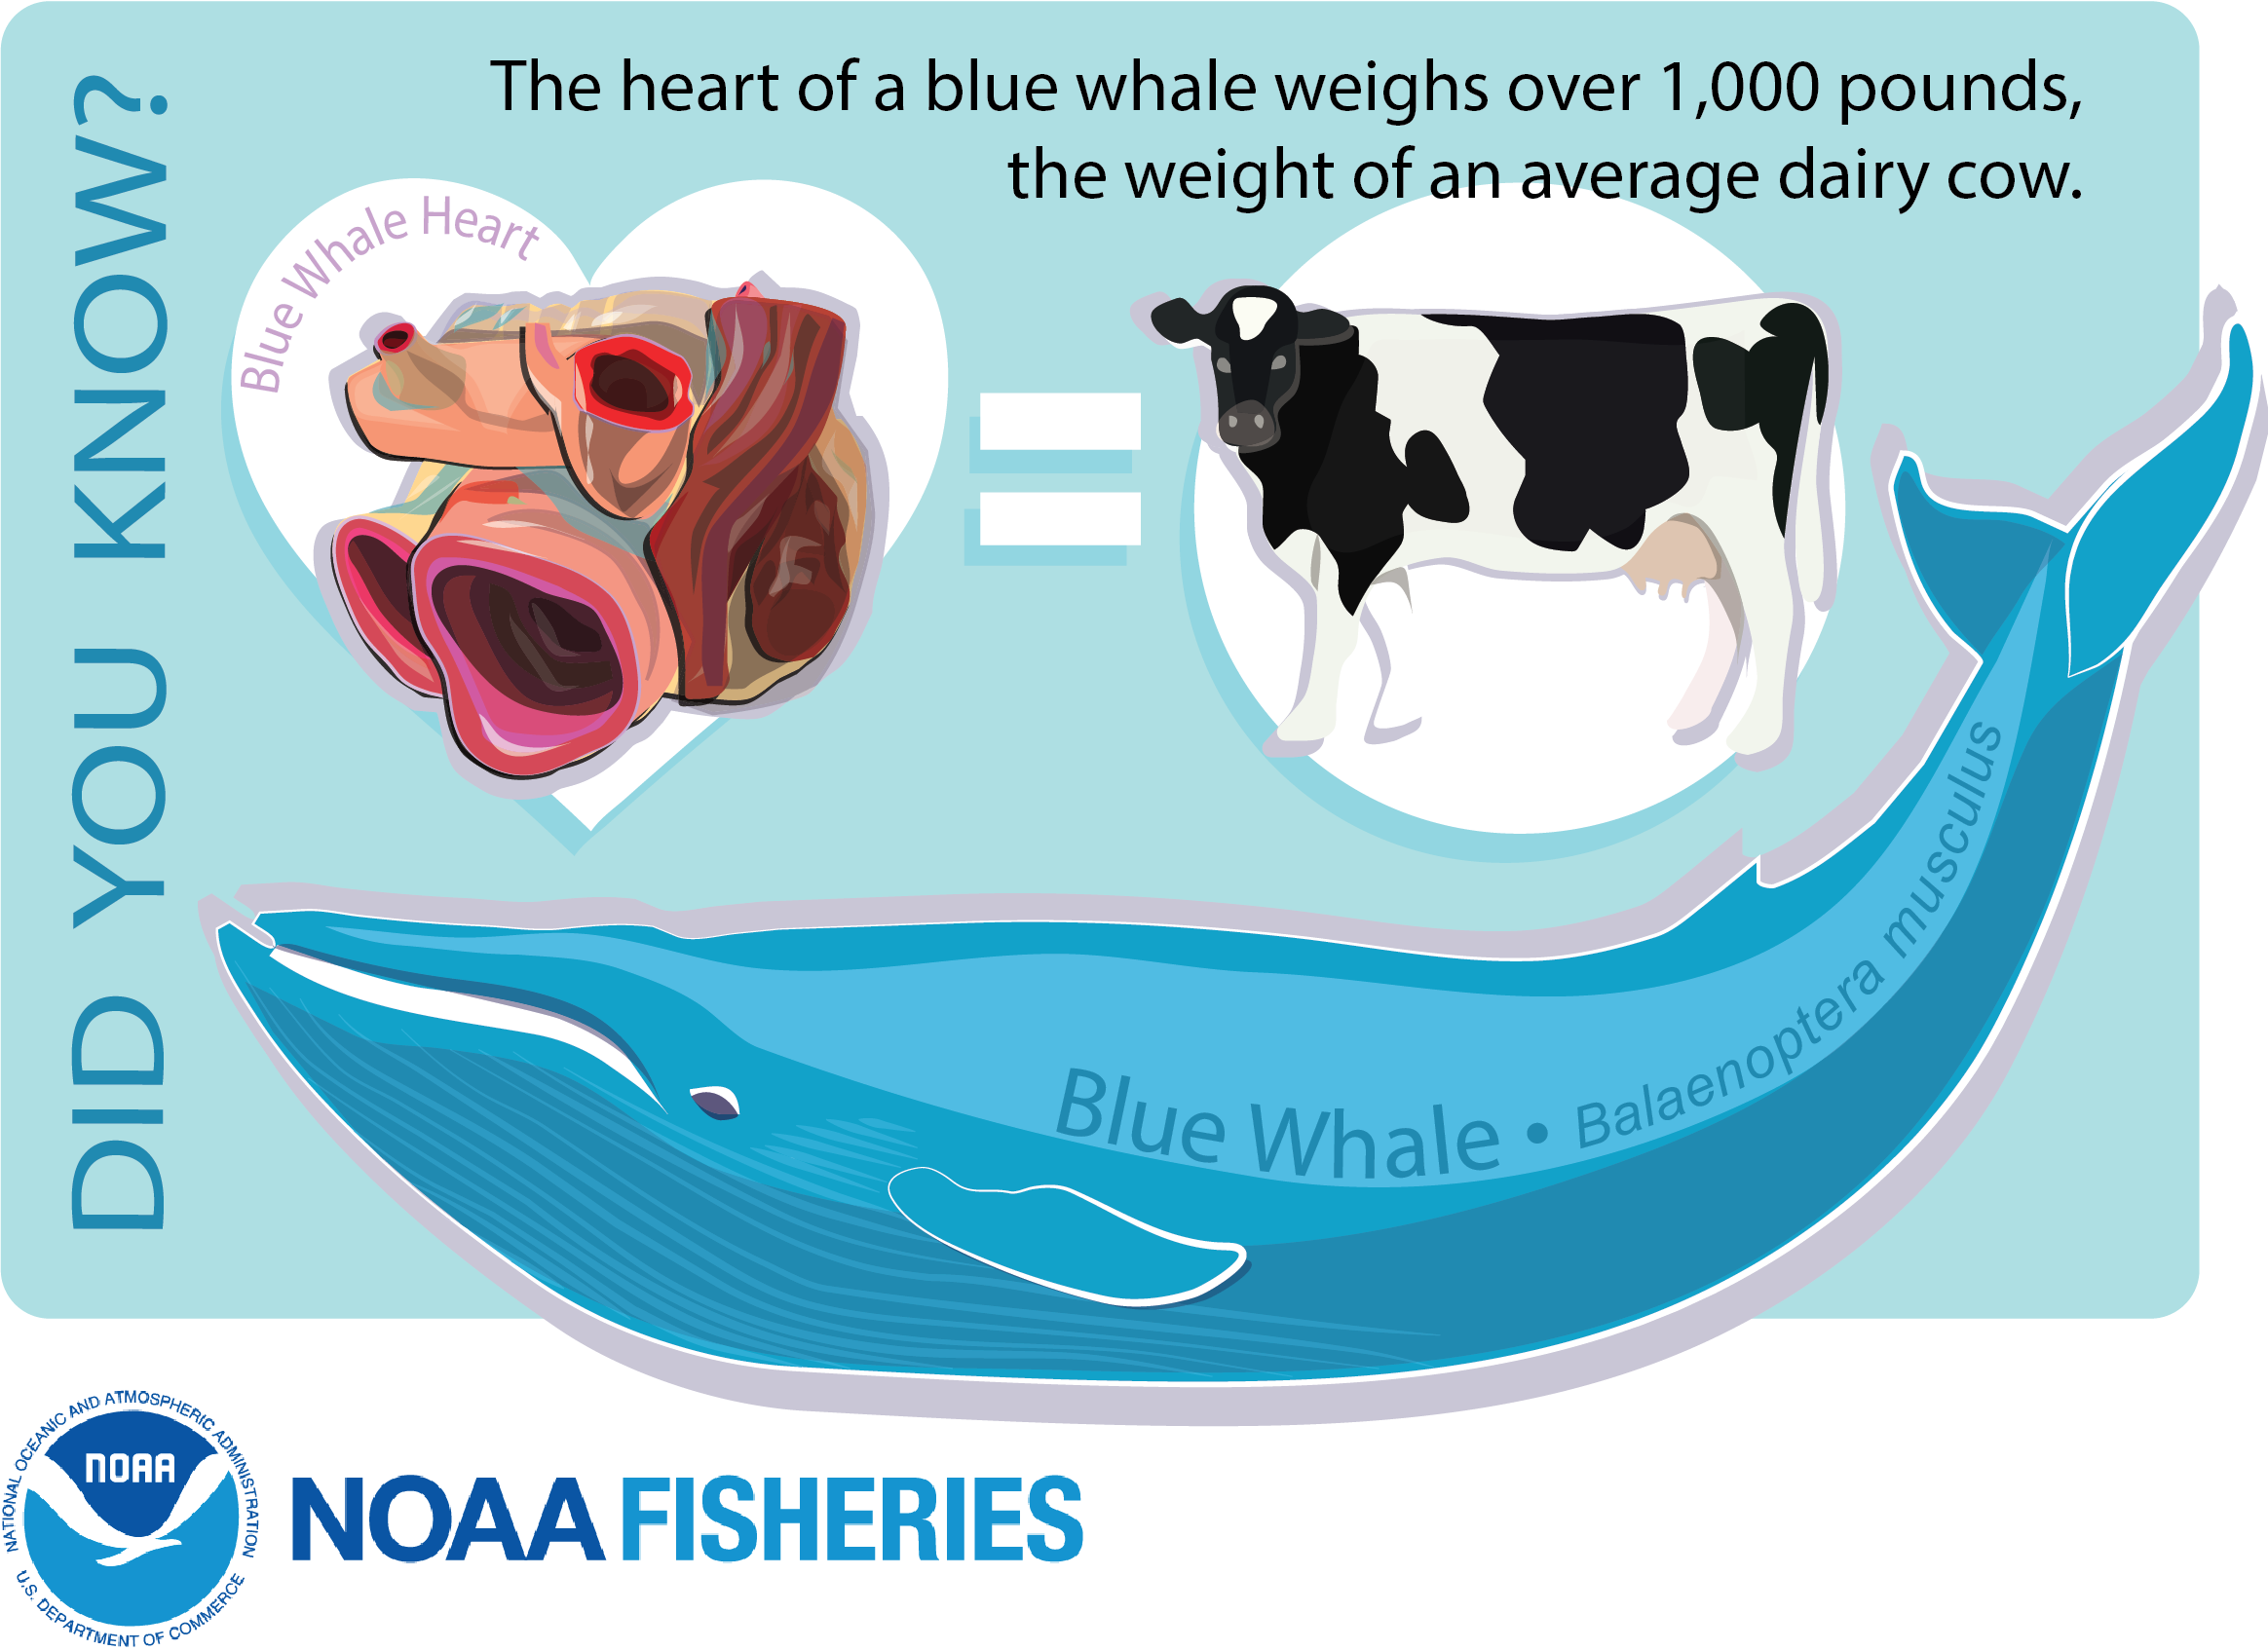 How big is a whale?